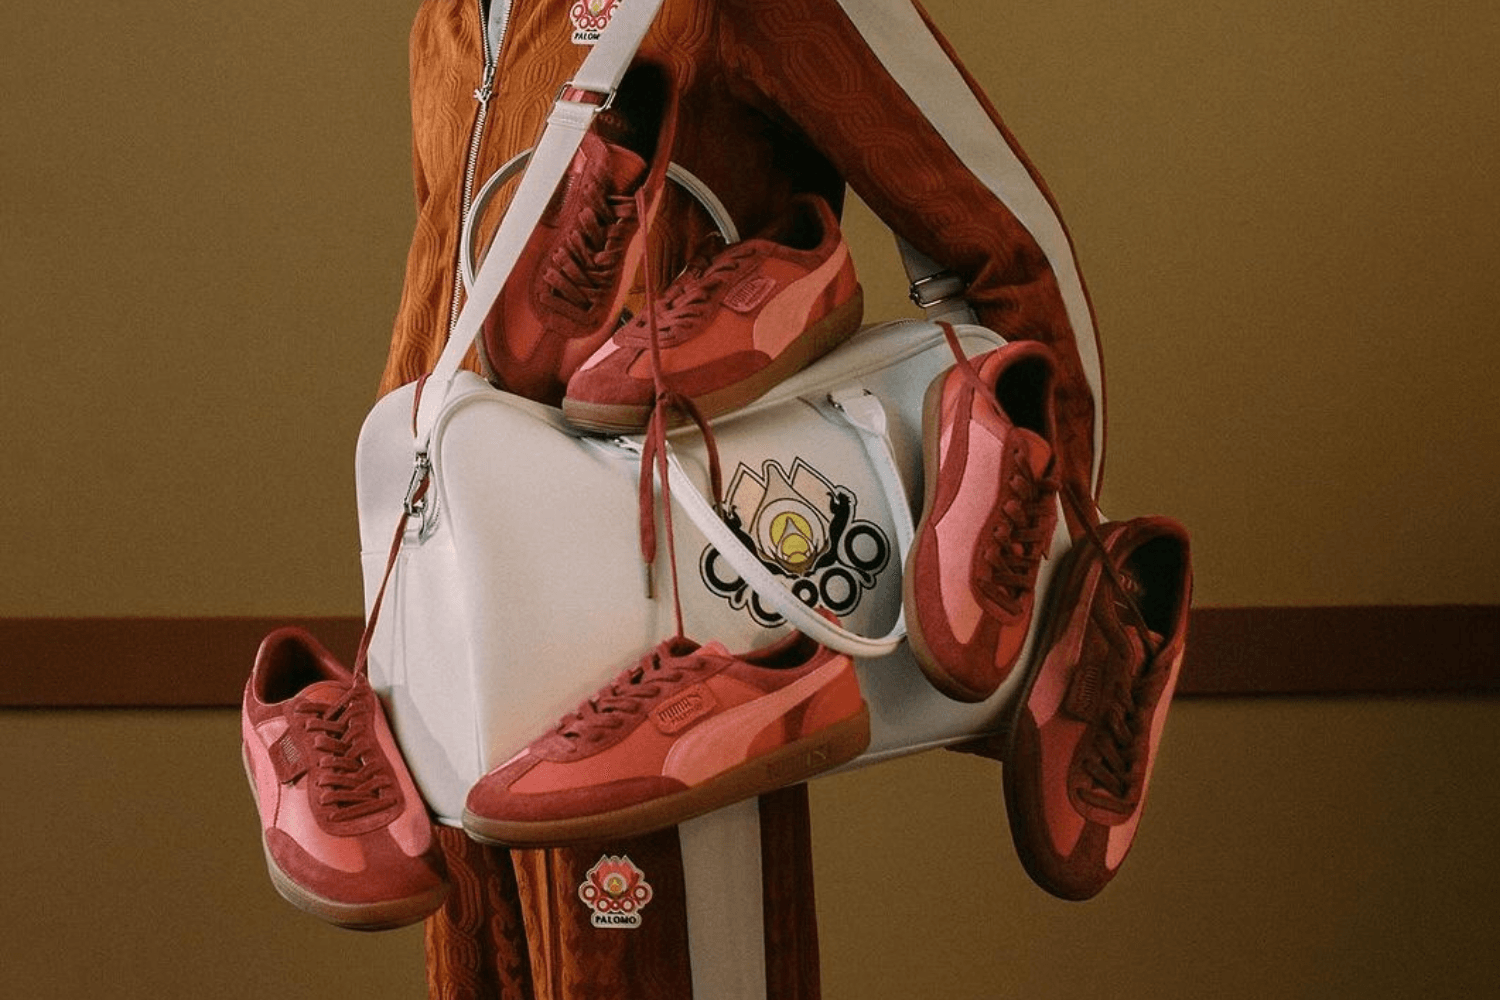 PUMA x Palomo Spain collection pays tribute to the 70s